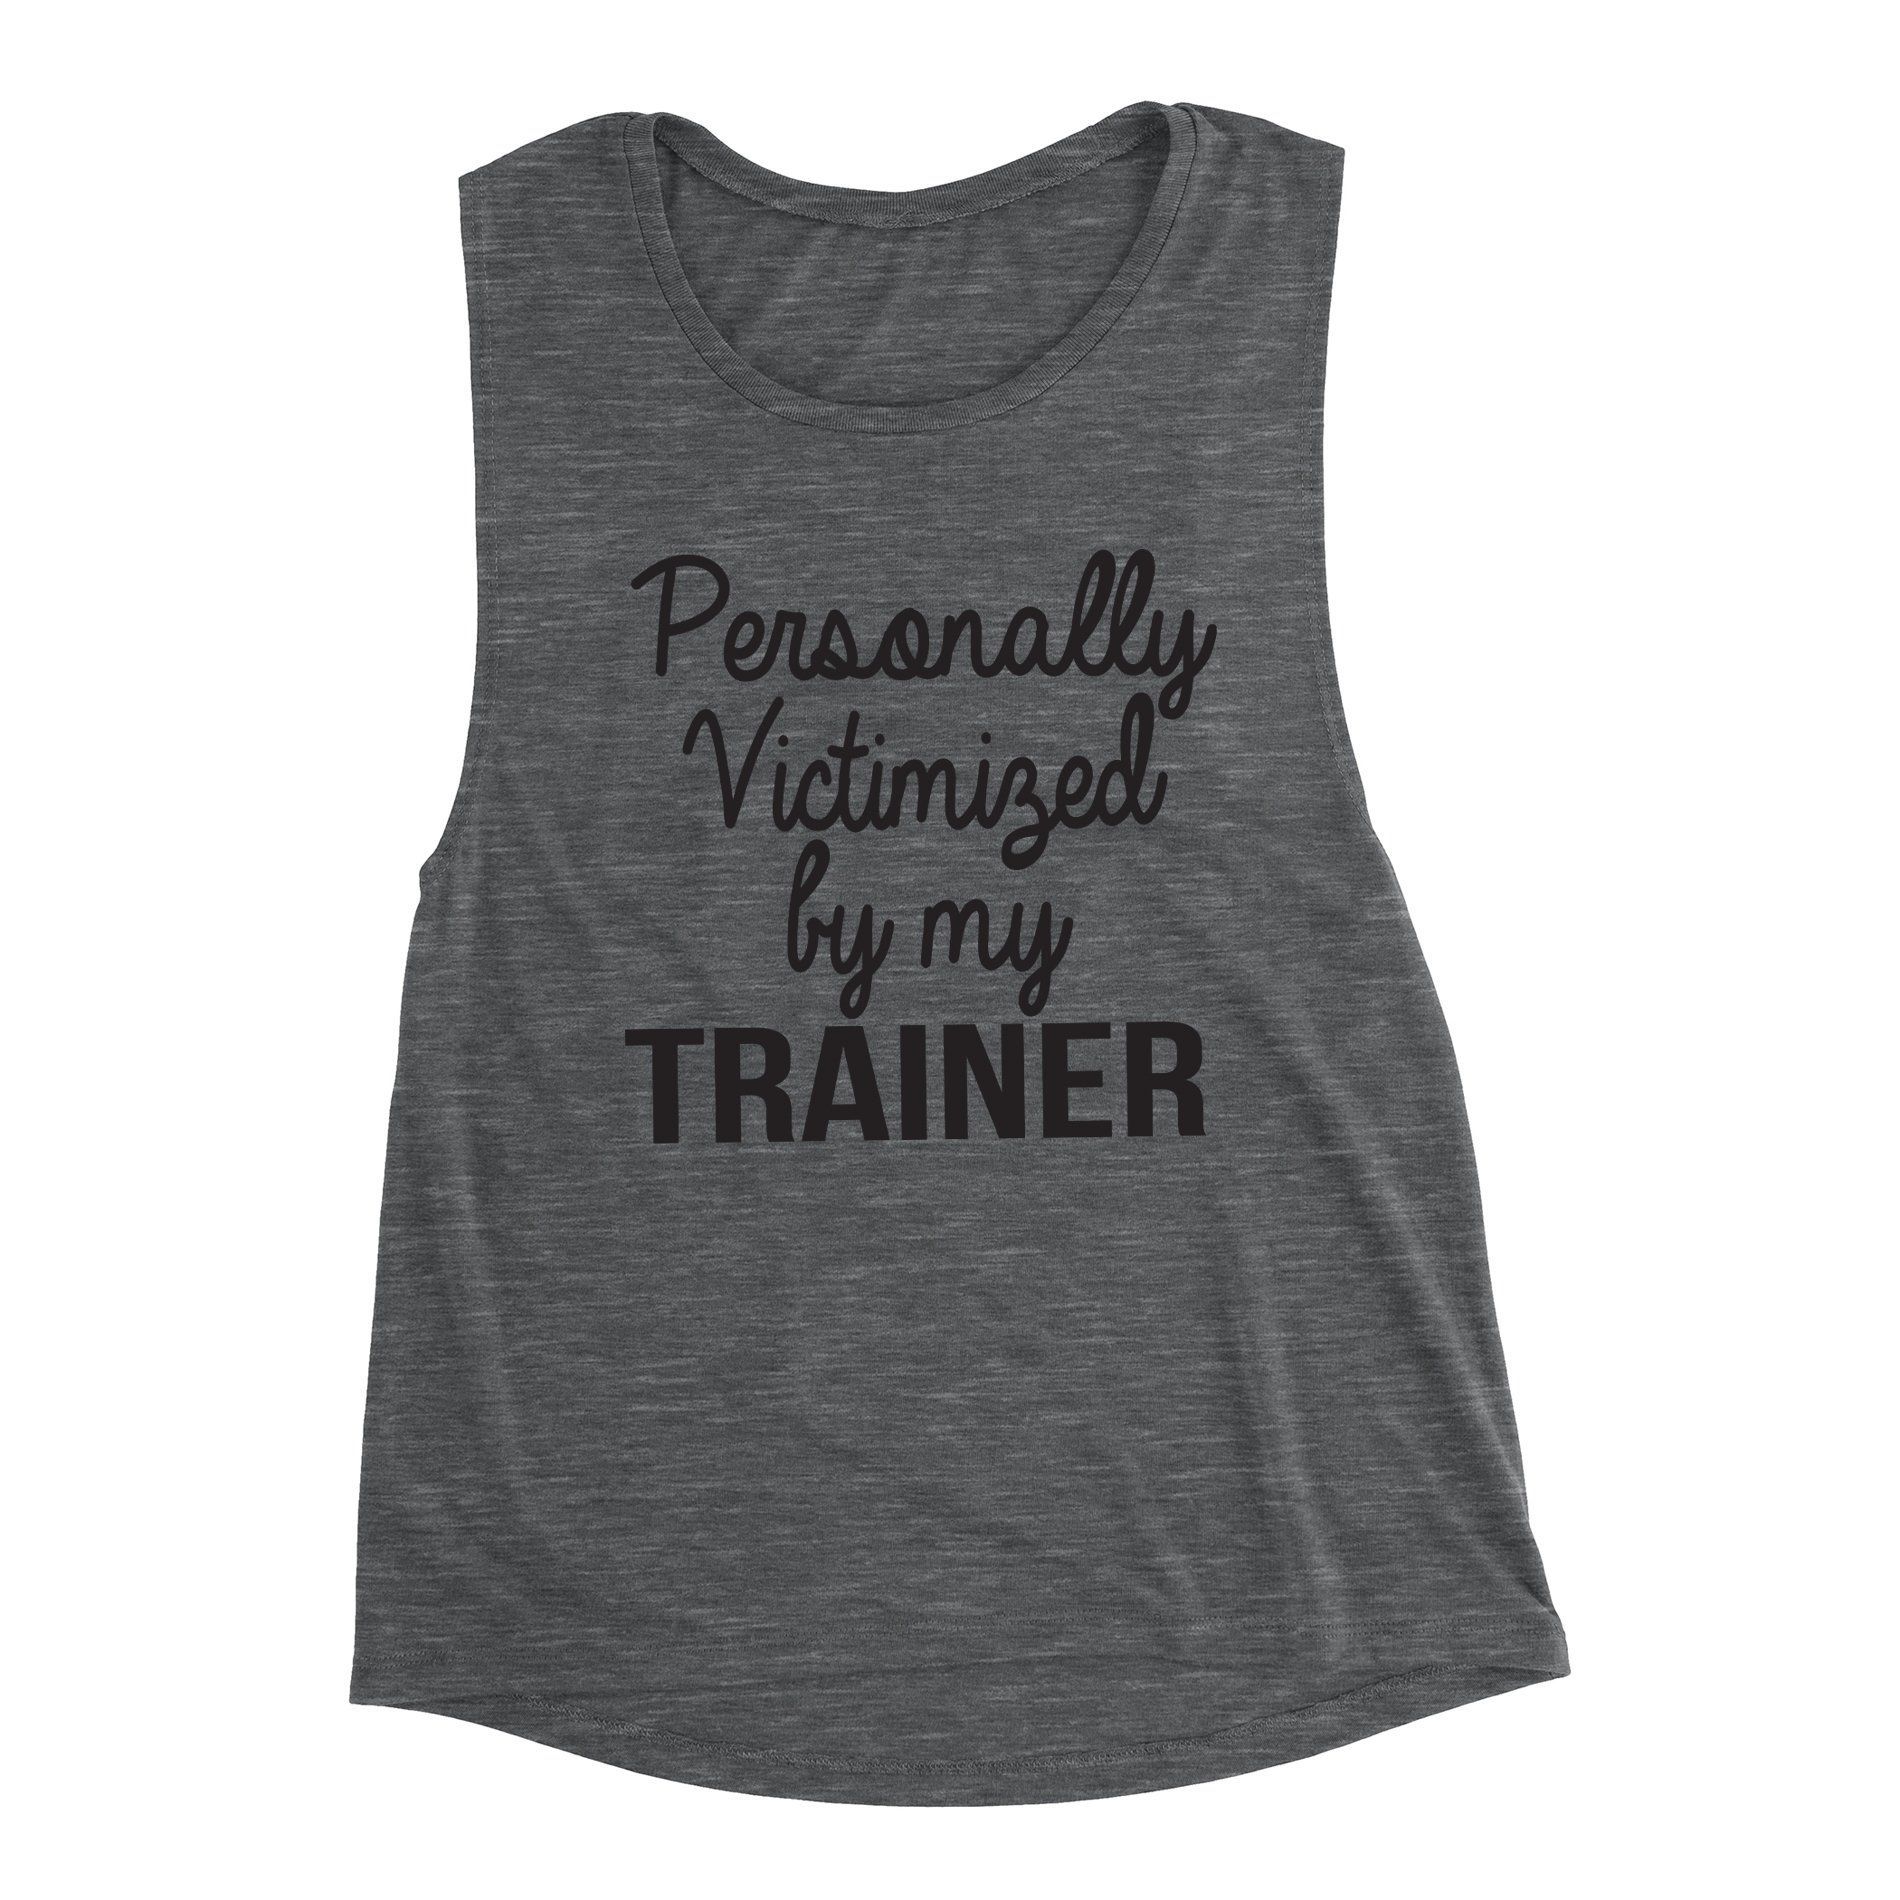 Funny Workout Tank. Personally Victimized By My Trainer. Gym Shirt. Fitness Shirt For Women. New Year New You. Yoga Tank. Running Shirt - Funny Workout Tank. Personally Victimized By My Trainer. Gym Shirt. Fitness Shirt For Women. New Year New You. Yoga Tank. Running Shirt -   16 fitness Clothes funny ideas